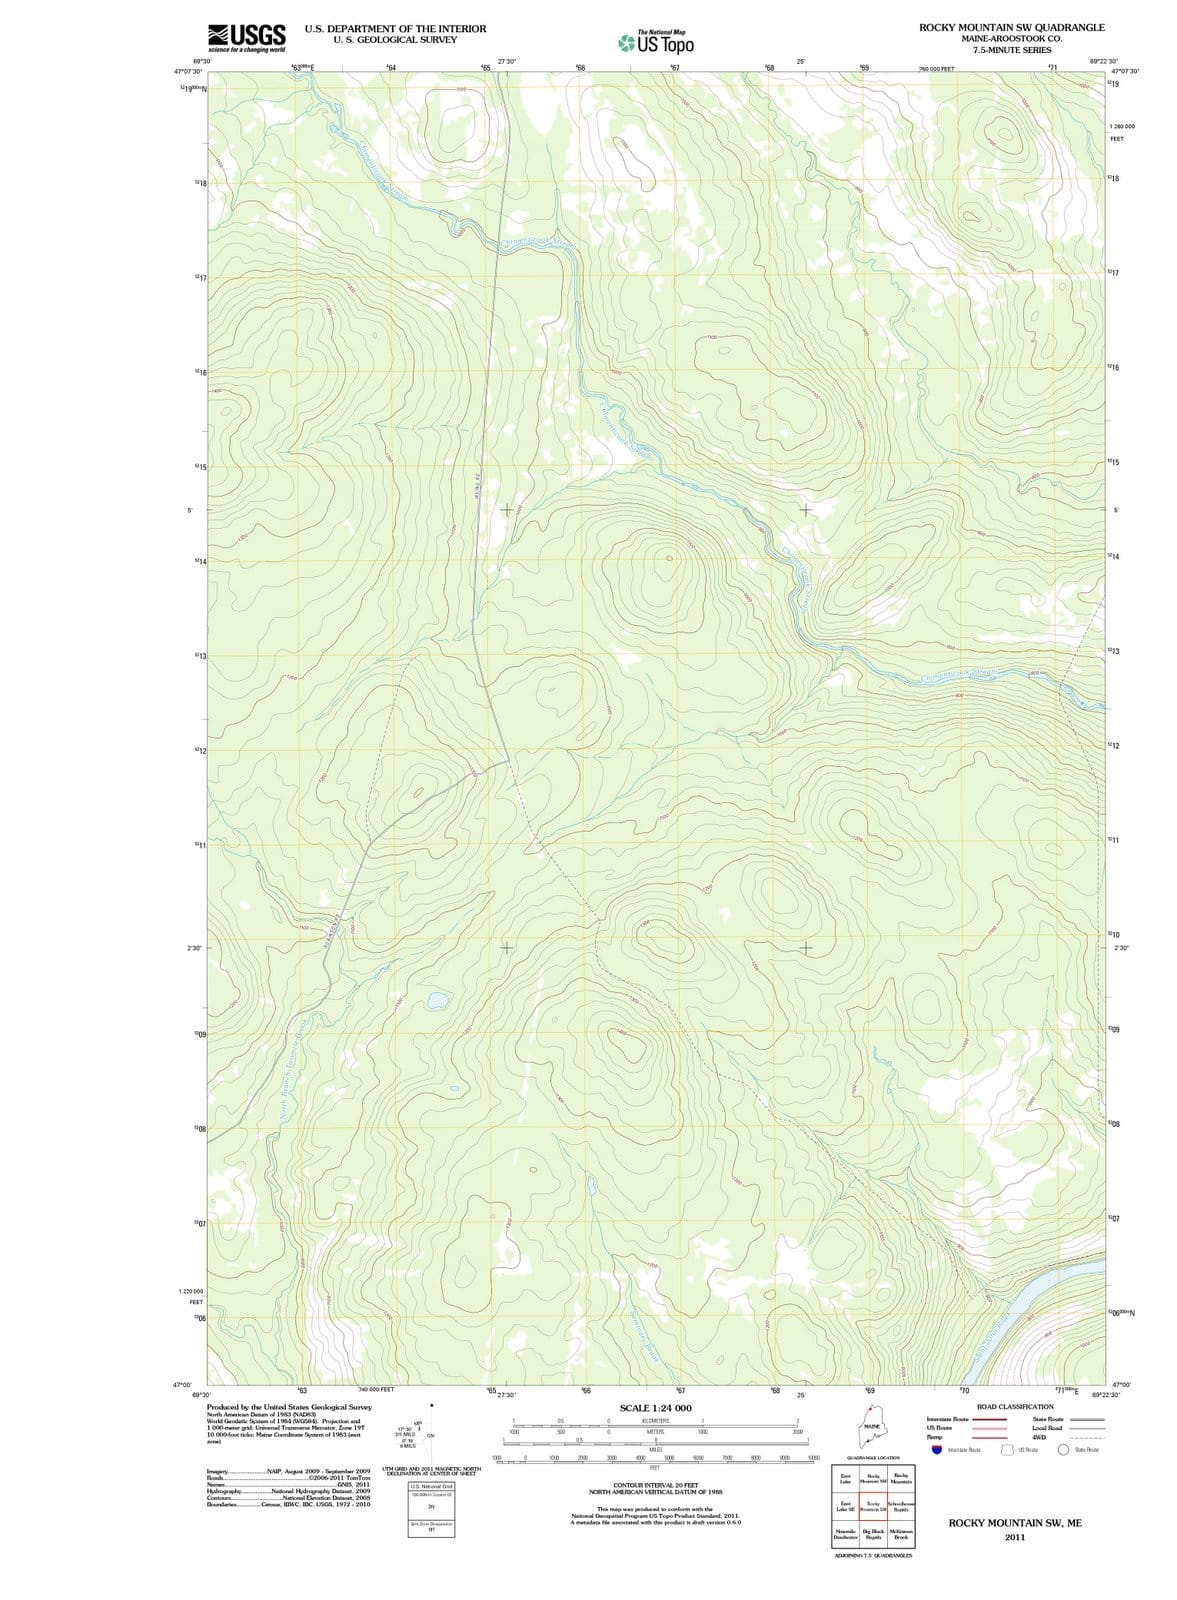 2011 Rocky Mountain, ME - Maine - USGS Topographic Map v3